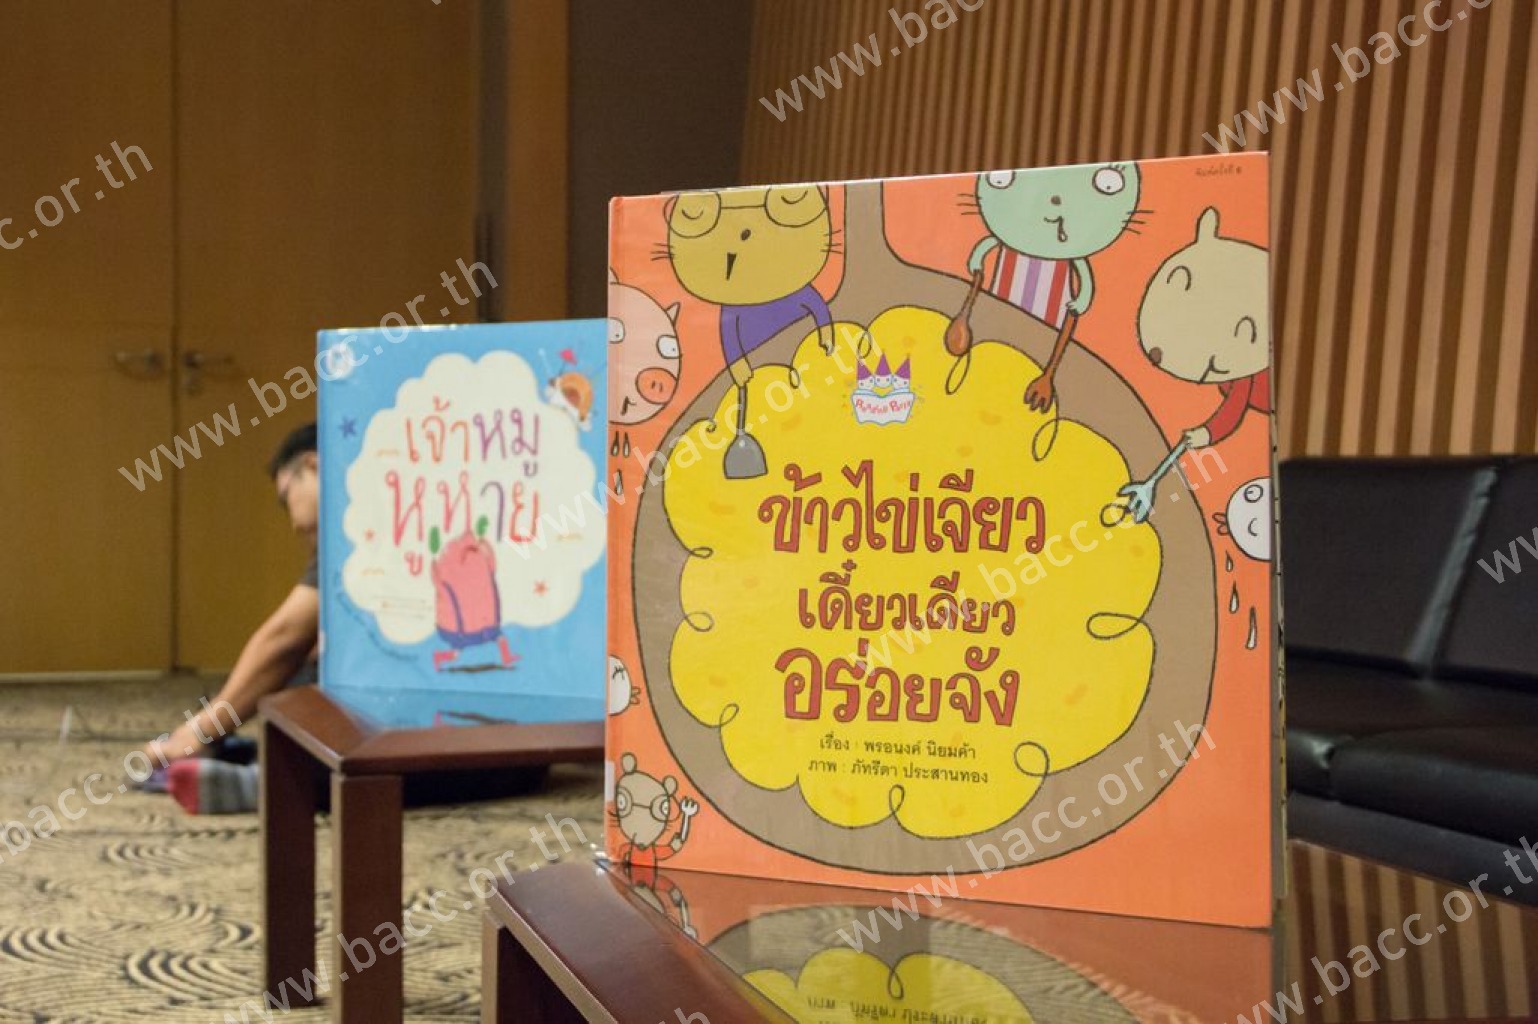 Storytelling Activity for Kids: “The story under the lotus leafs”